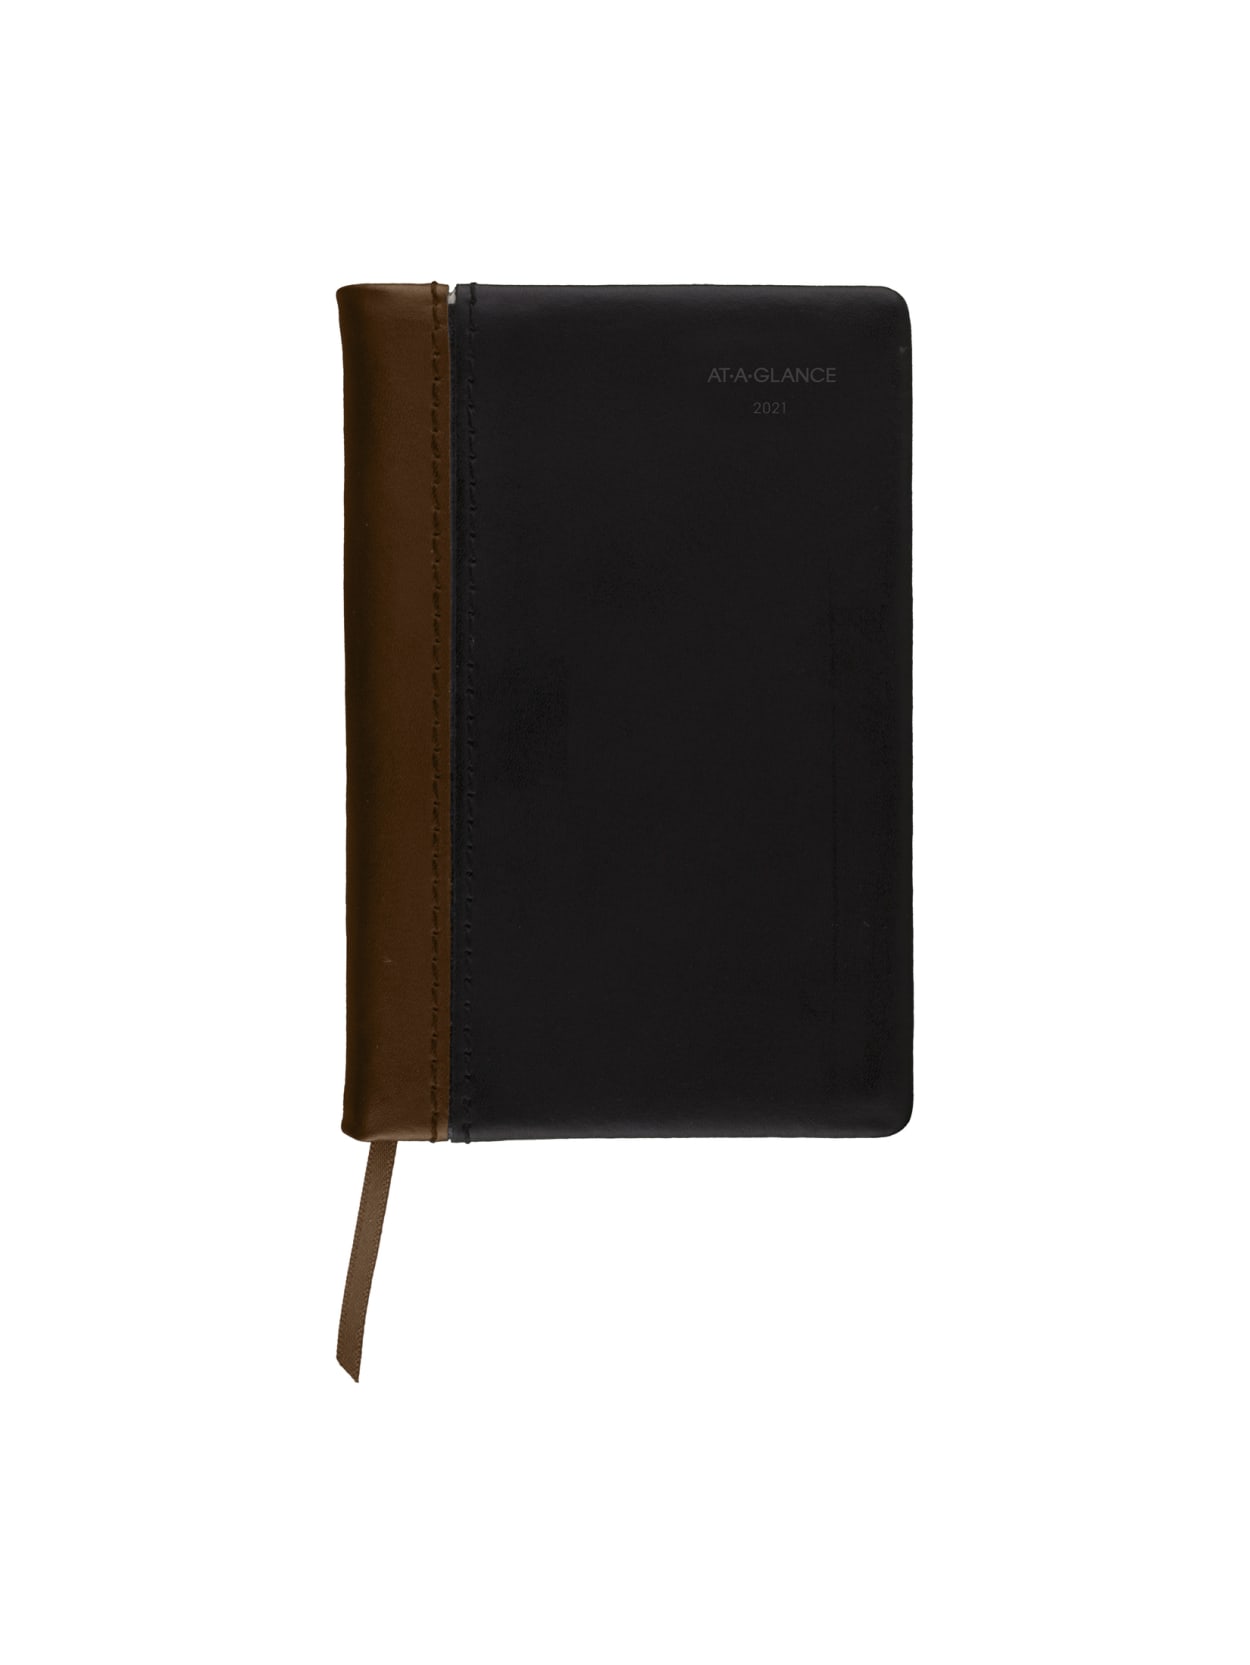 AT-A-GLANCE® Fine Diary Weekly/Monthly Diary, 2-3/4" x 4-1/4", Black/Brown, January to December 2021, 740105